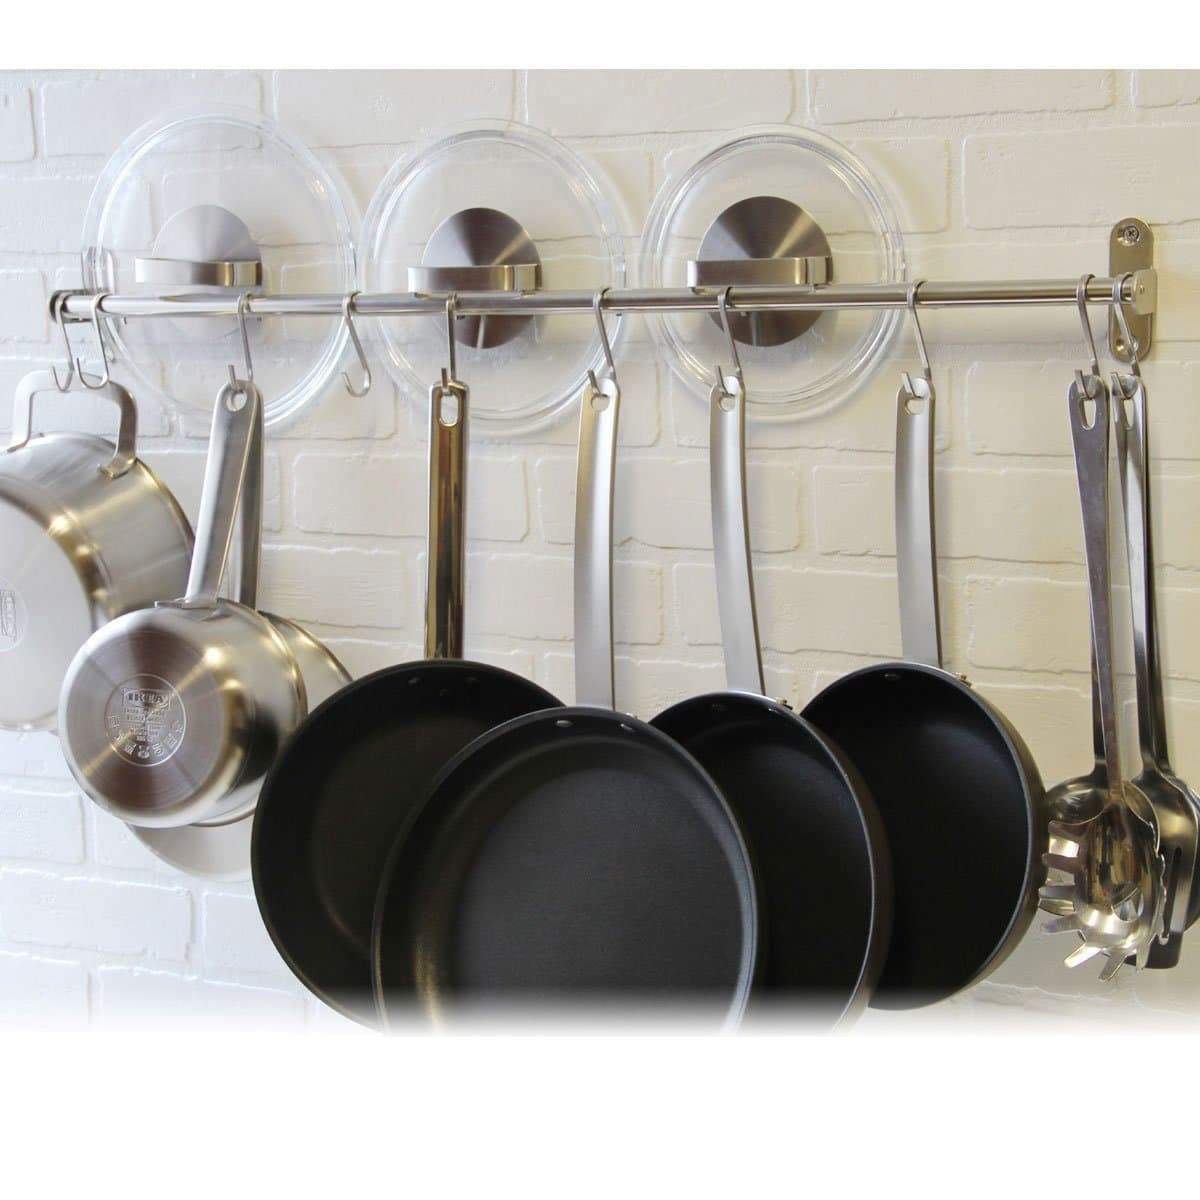 Explore wallniture lyon gourmet kitchen wall mount rail and 10 hooks stainless steel pot pan lid holder rack 31 5 inch